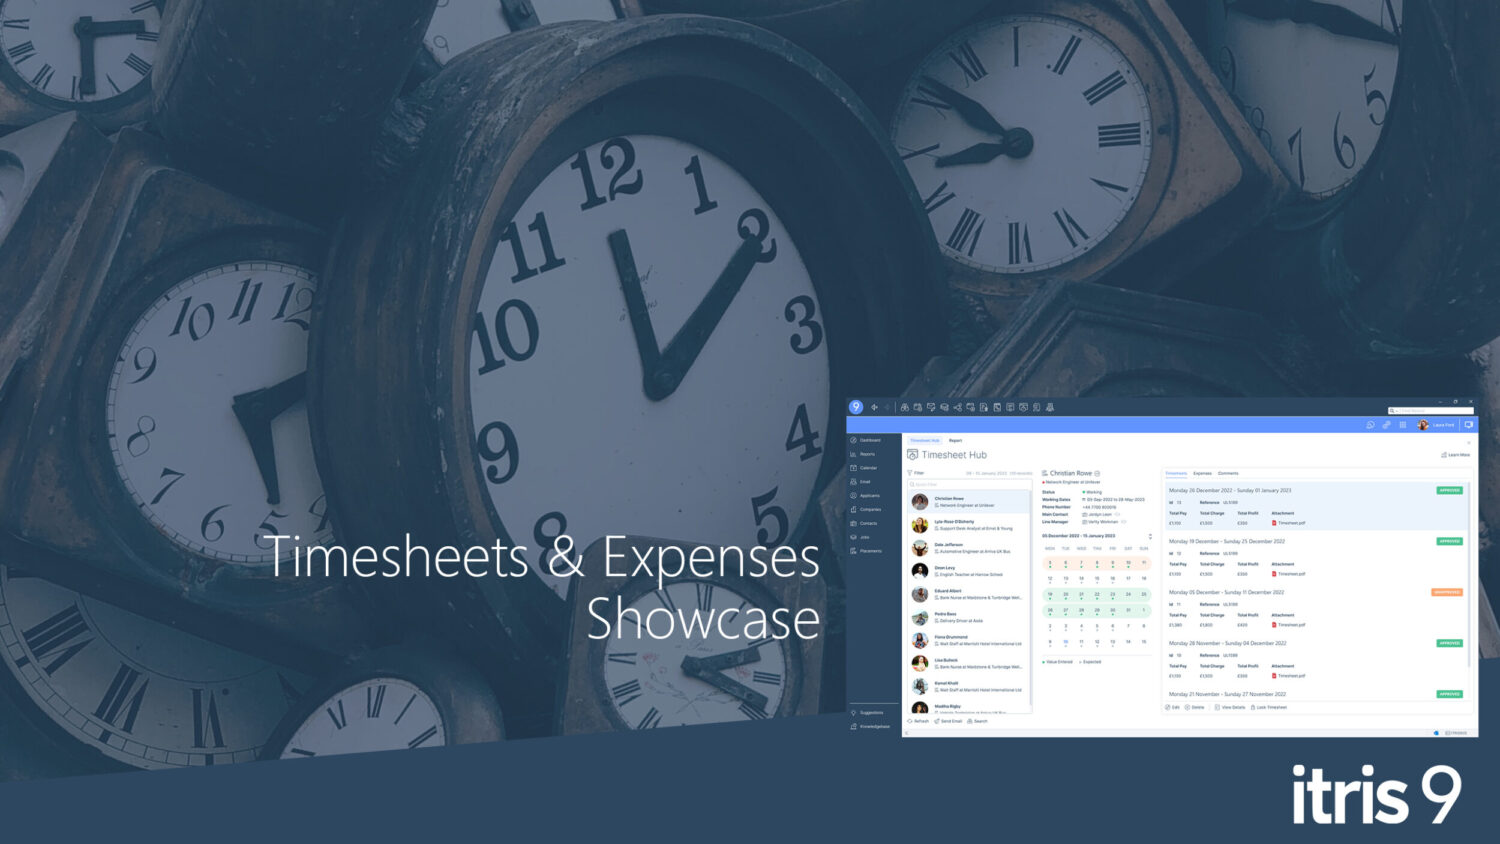 Recruitment CRM software itris 9 Timesheets Showcase Video